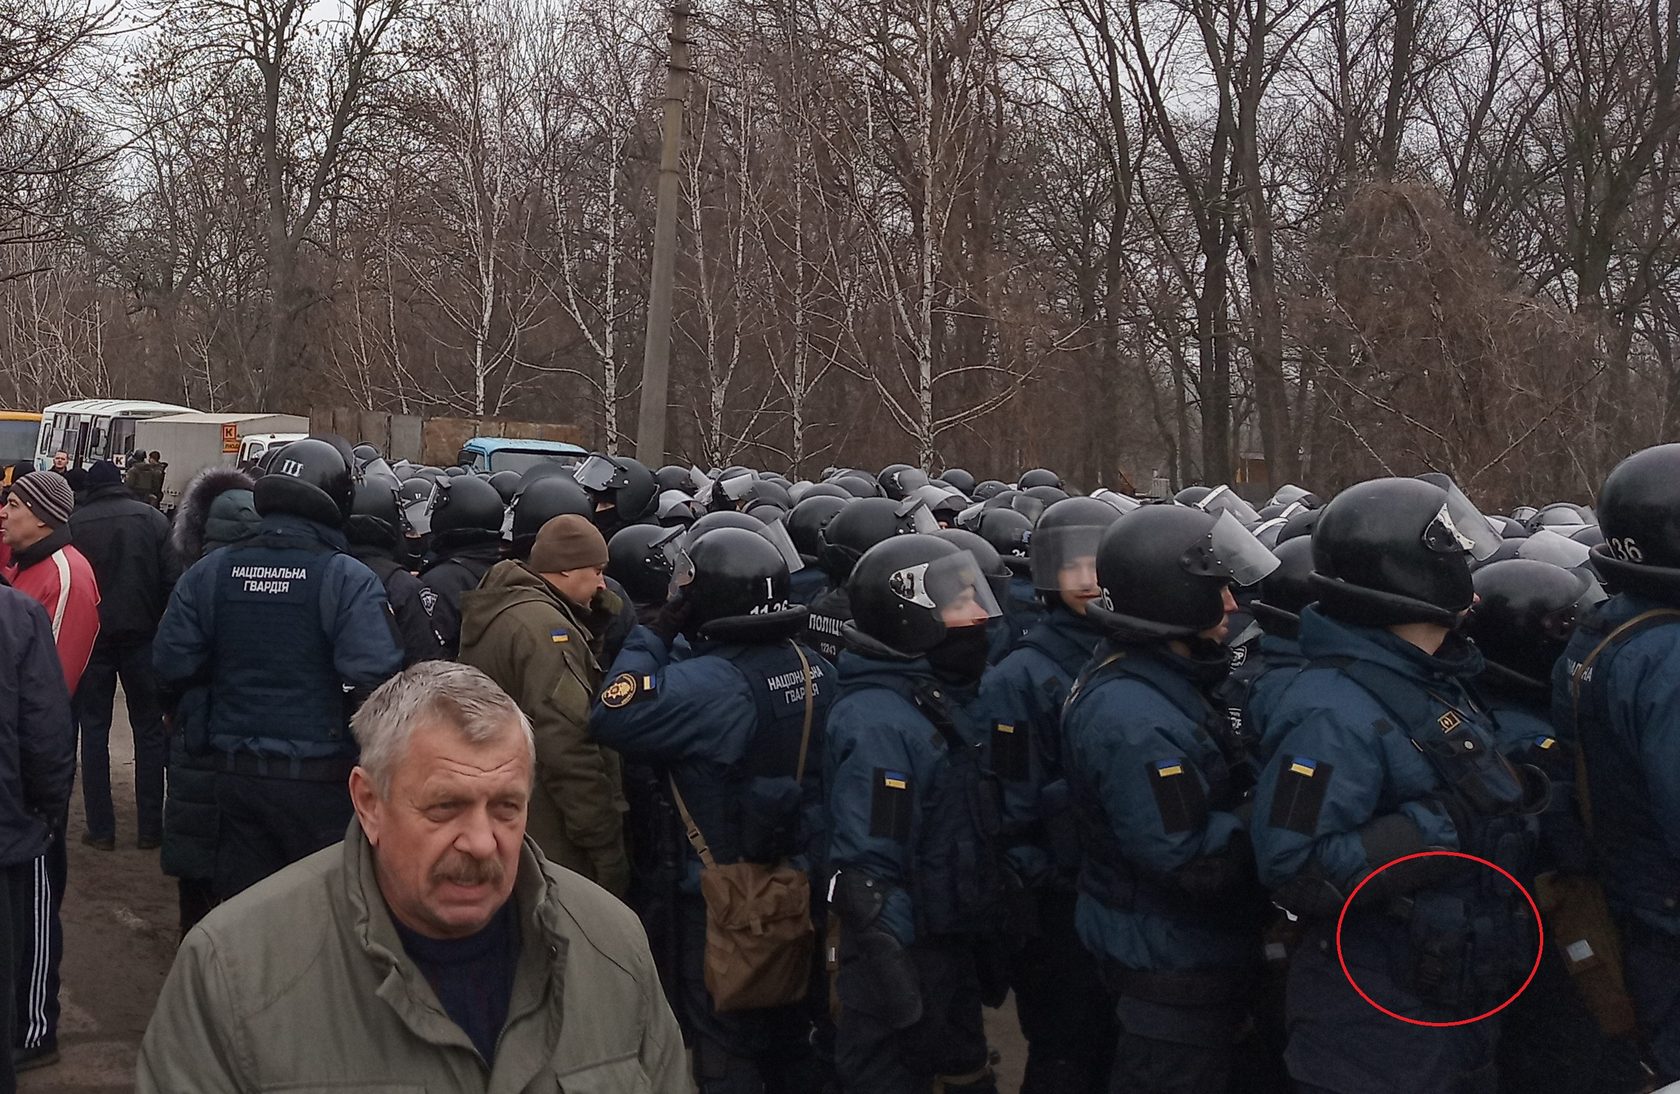 Numerous police arriving in helmets and with weapons. Source: texty.org.ua ~